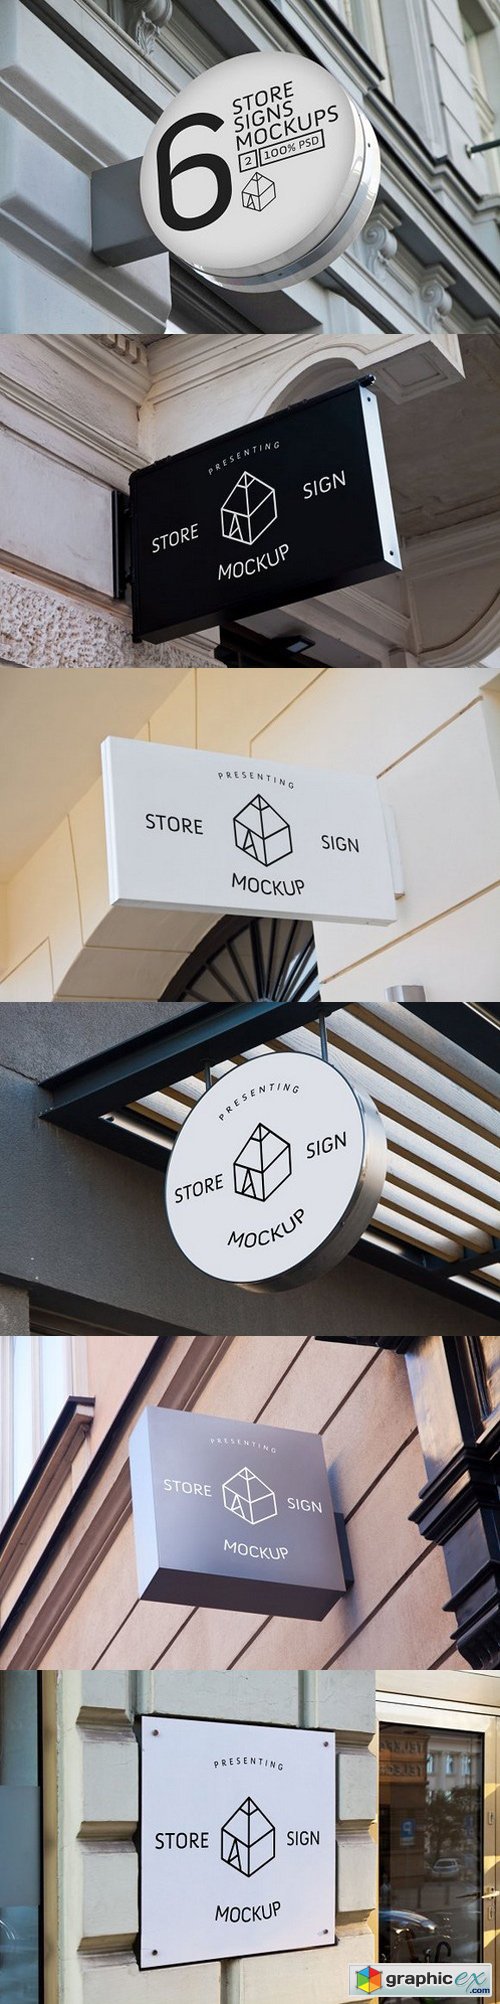 Store Signs Mock-ups 2